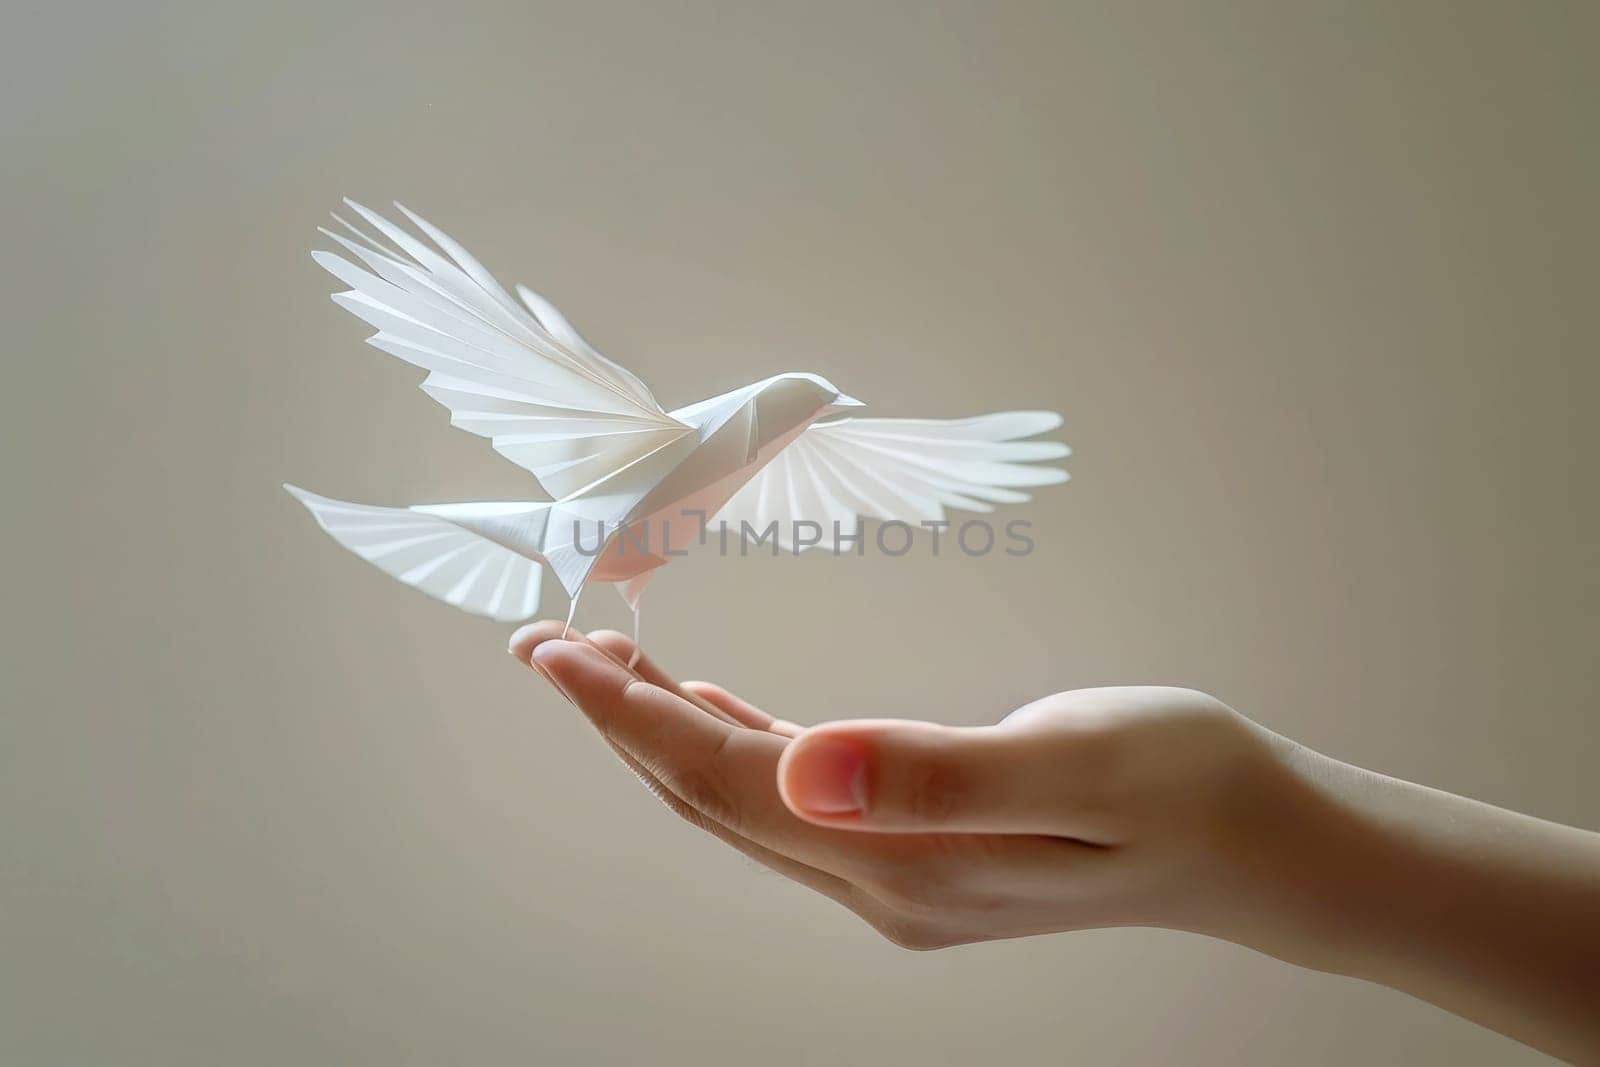 Origami Paper Bird Flight from Open Palm Symbolizing and Freedom to Dream. peach concept.